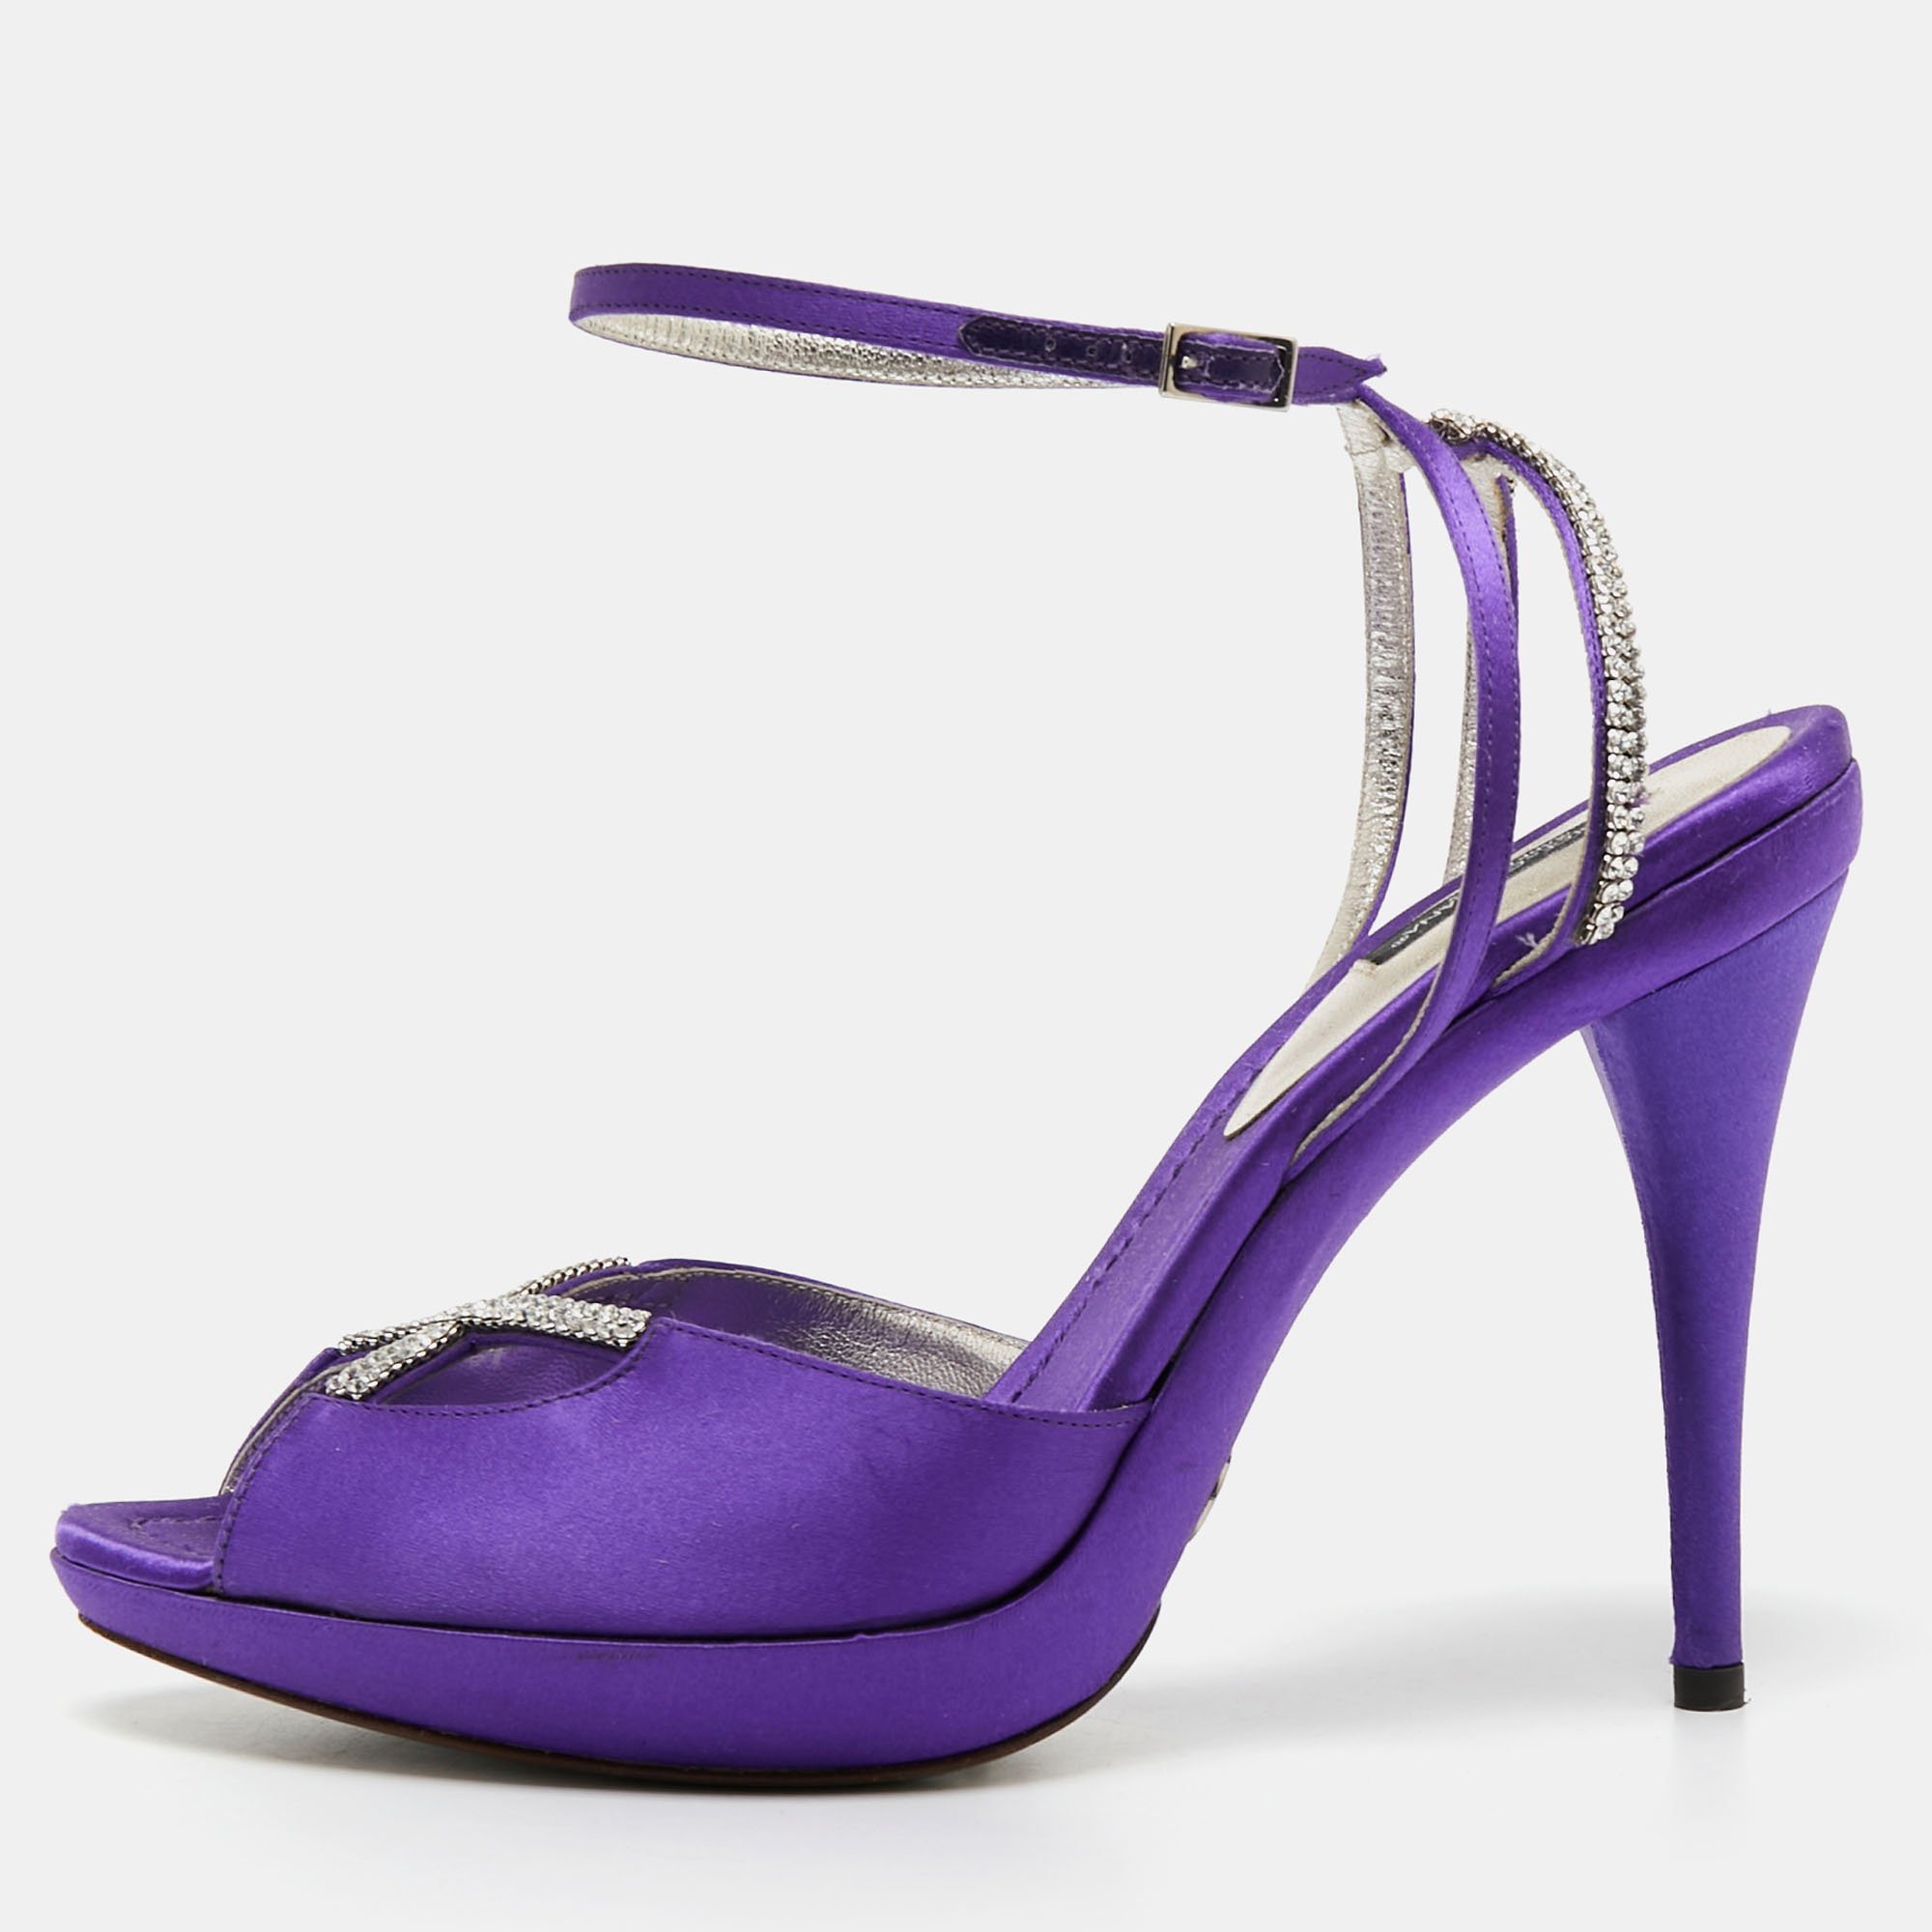 These sandals from the House of Dolce and Gabbana will add a chic touch to your outfit. They are created using purple satin which is elevated with crystal embellishments. They flaunt open toes an ankle strap and slim heels. Stay stylish all day with these gorgeous sandals.